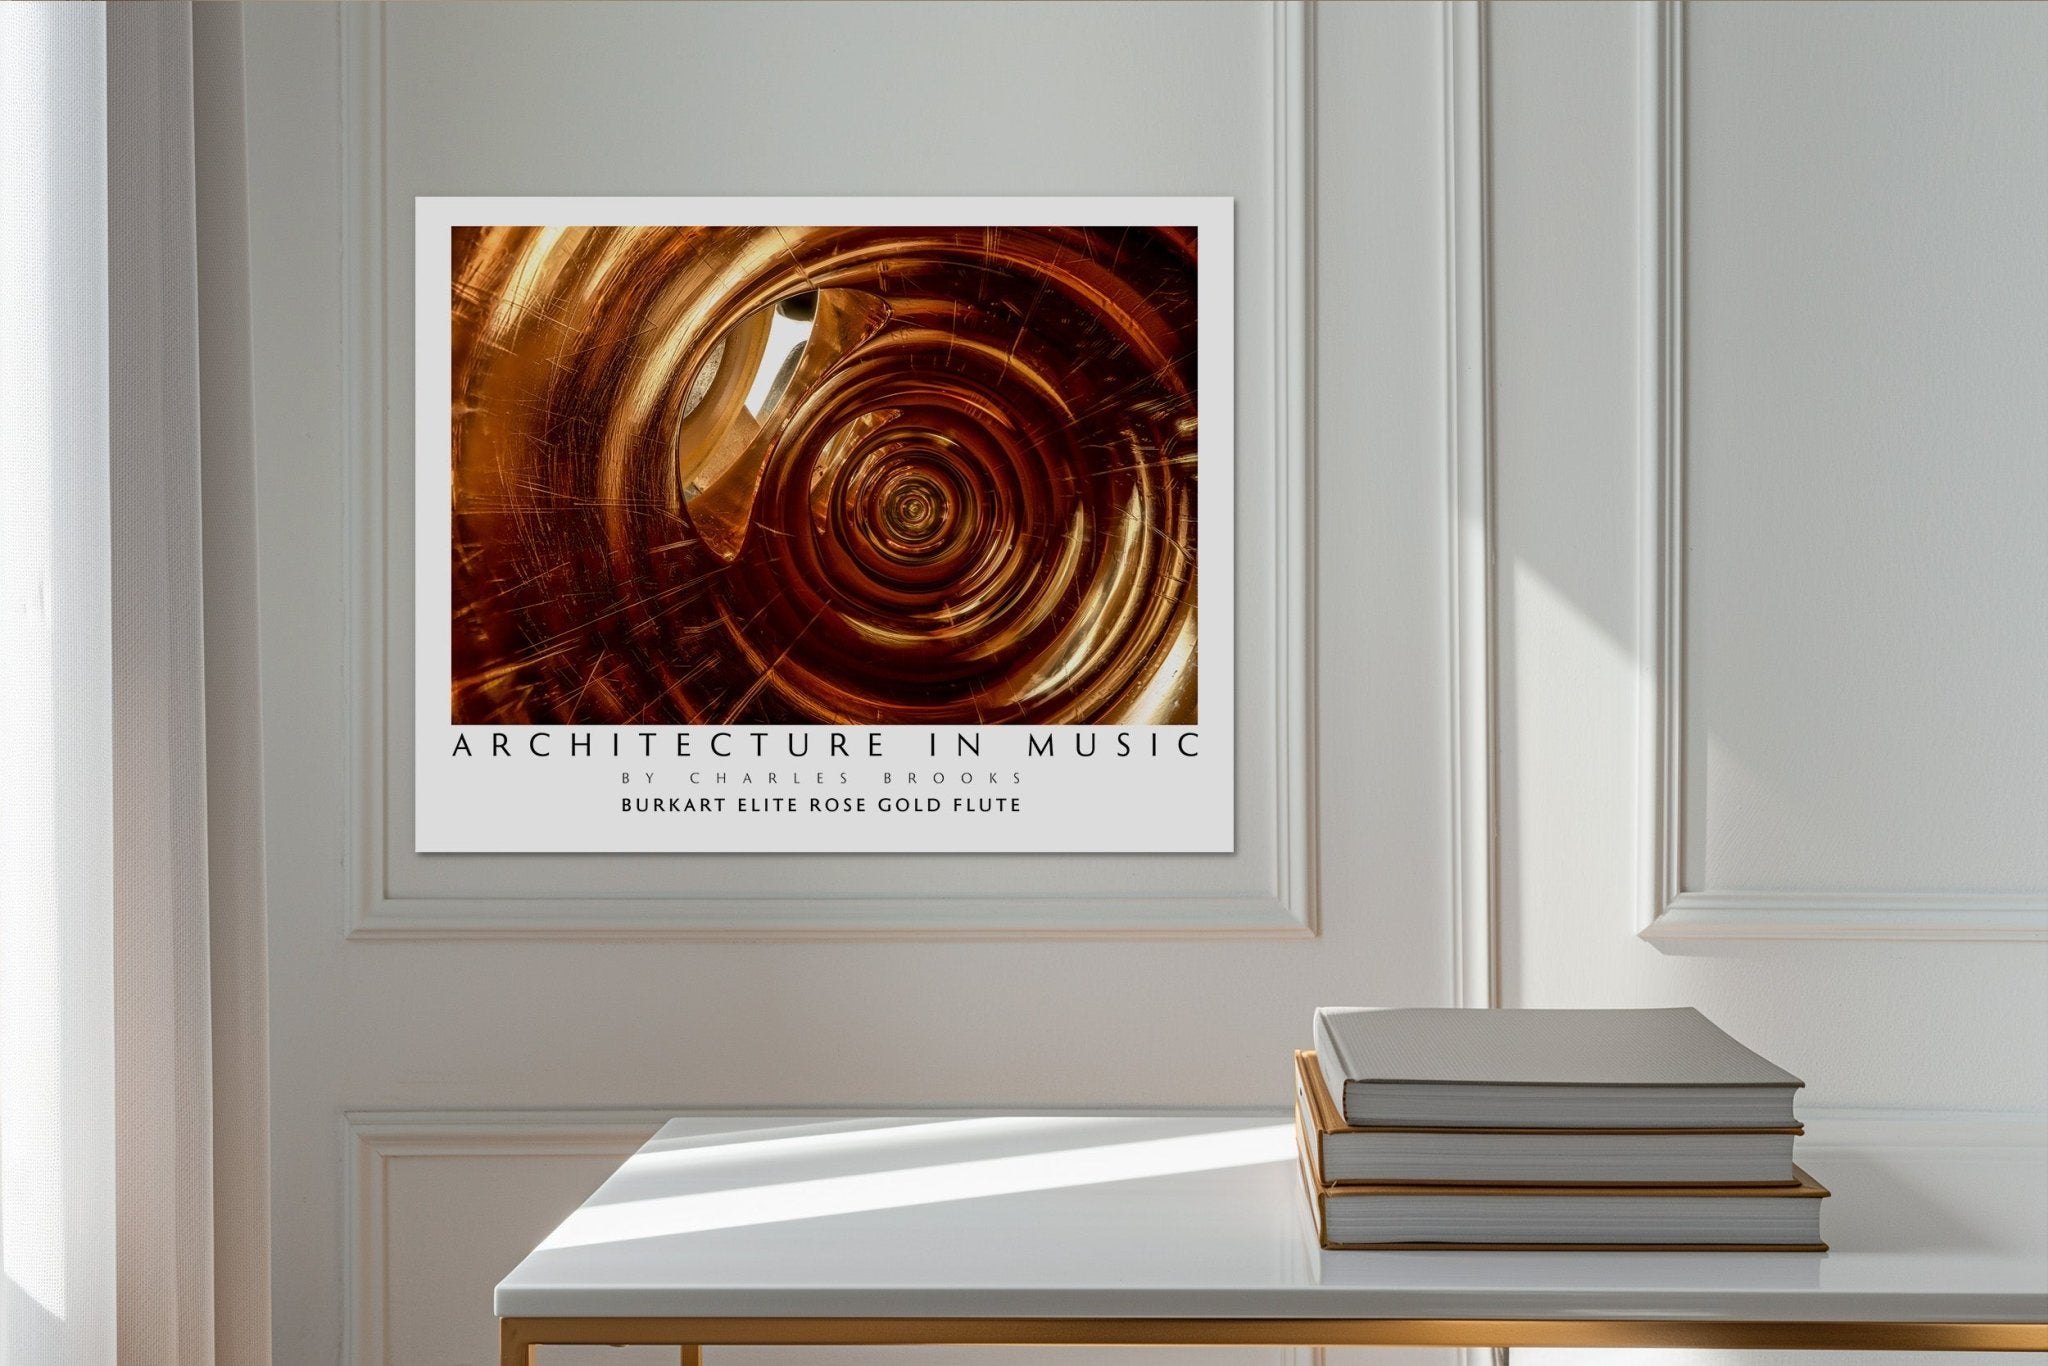 Photo of 14k Burkart Elite Rose Gold Flute. High Quality Poster. - Giclée Poster Print - Architecture In Music